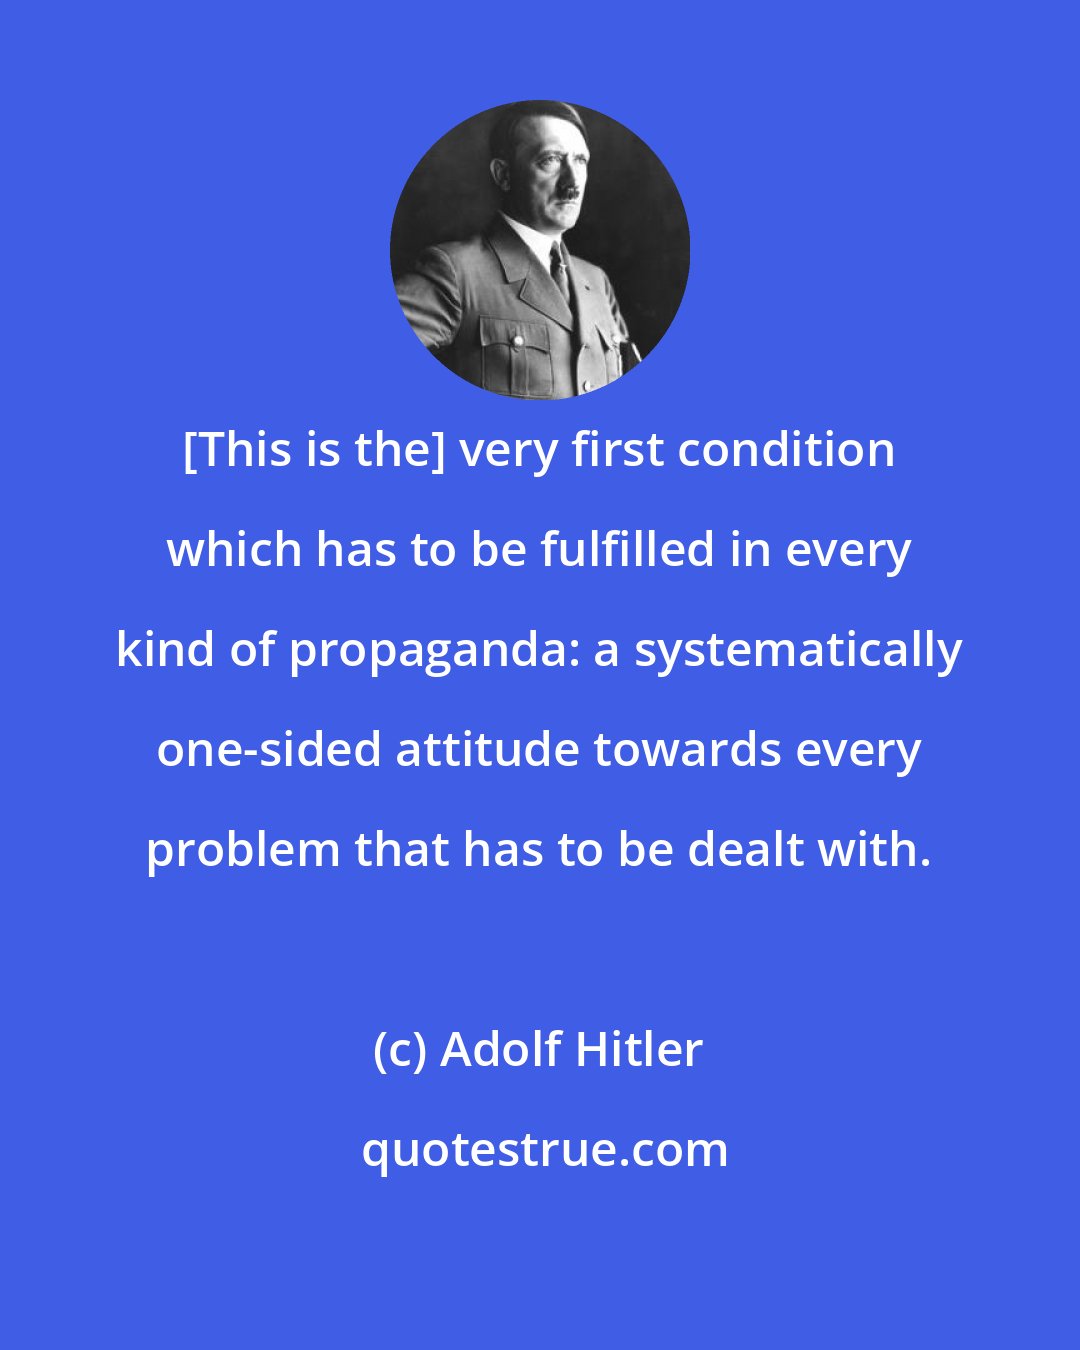 Adolf Hitler: [This is the] very first condition which has to be fulfilled in every kind of propaganda: a systematically one-sided attitude towards every problem that has to be dealt with.